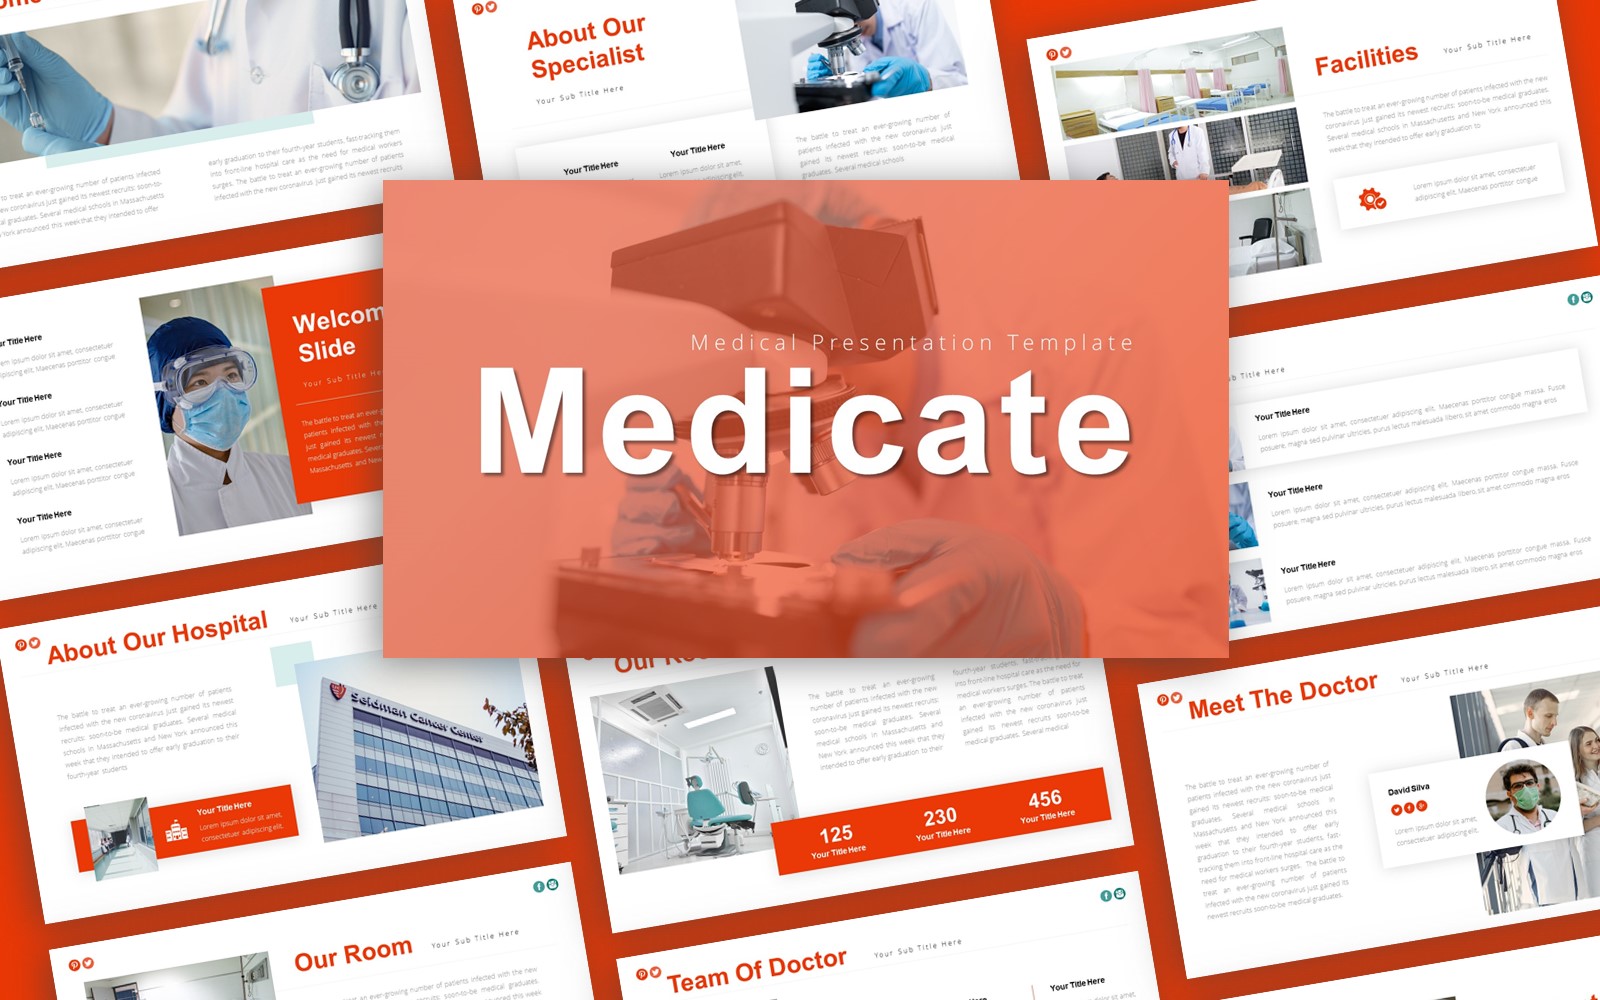 Medicate Medical Presentation PowerPoint template